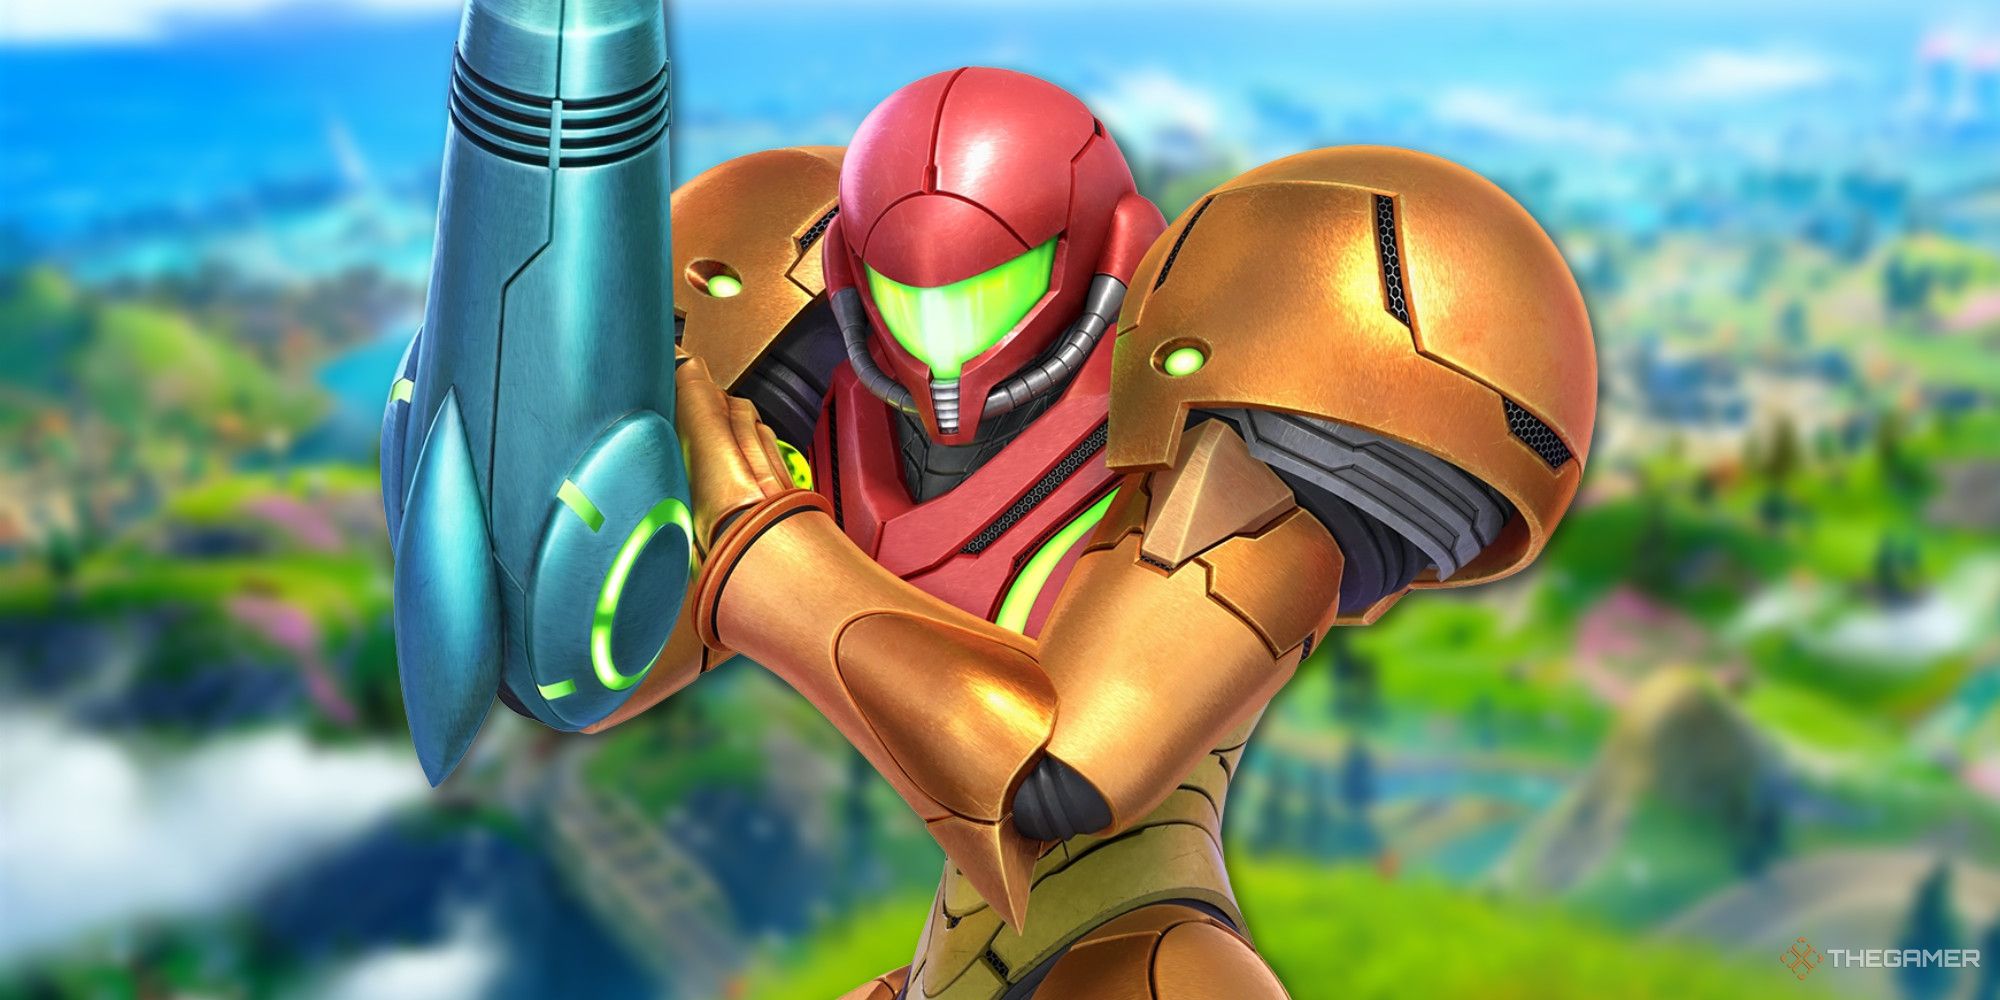 Samus Aran from Metroid above a sweeping view of the Fortnite islan